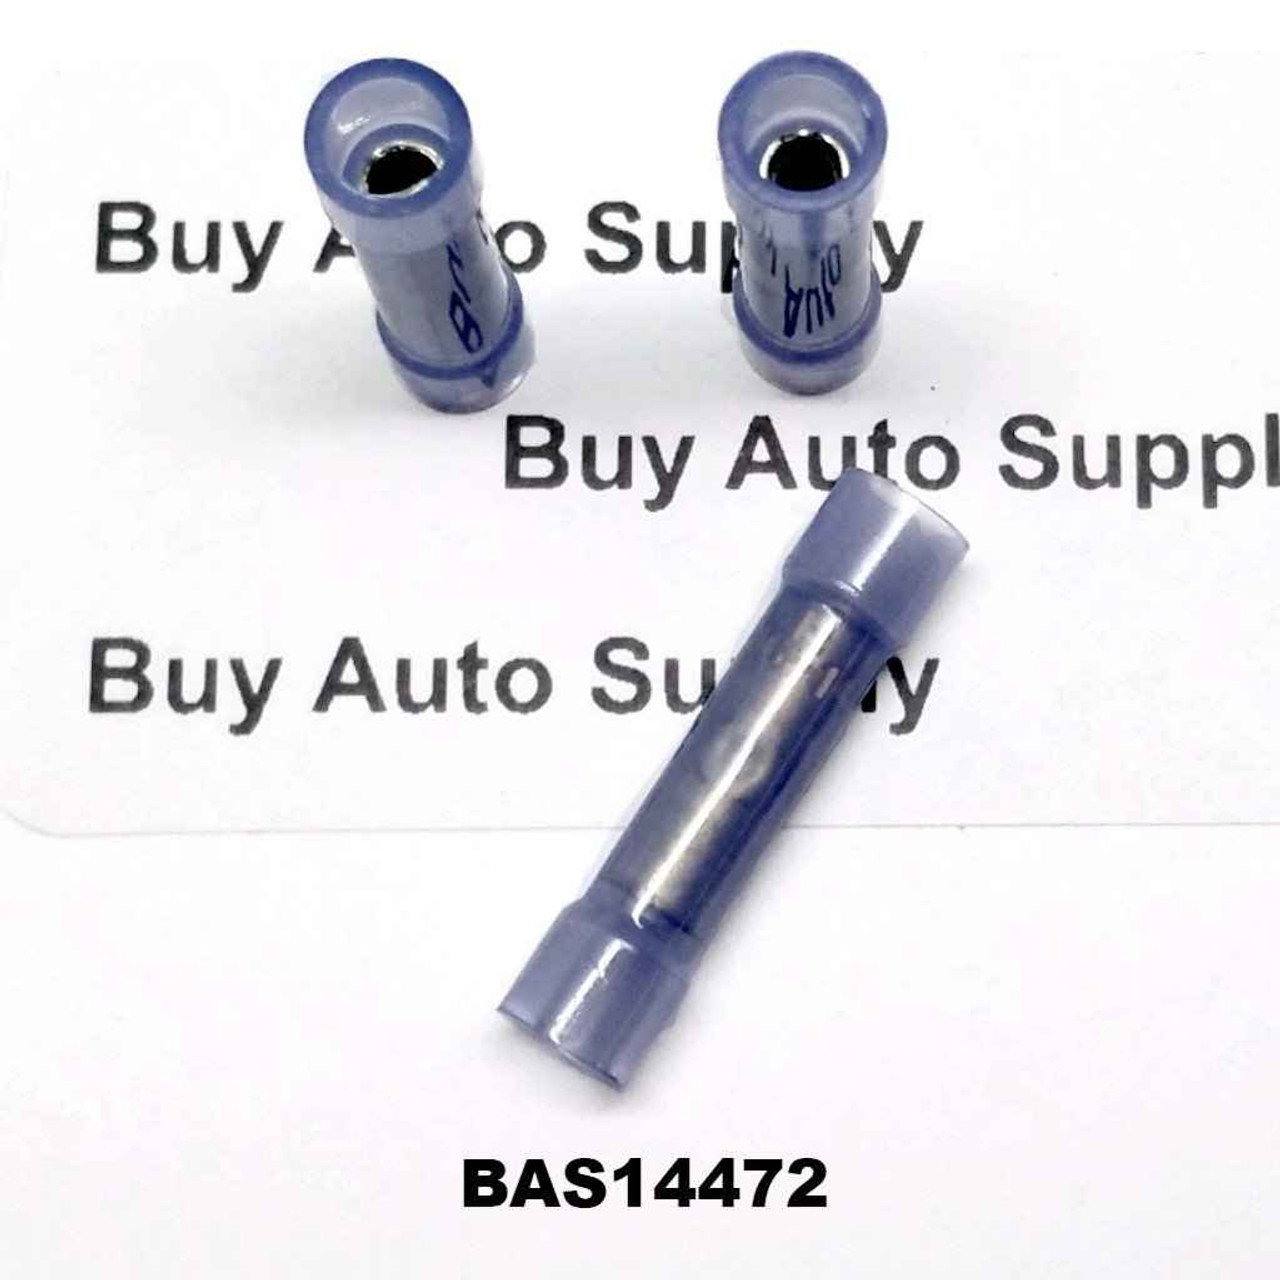 BAS14458B - Blue Nylon Ring Connector 16-14 (1/2 Stud) 100 Count